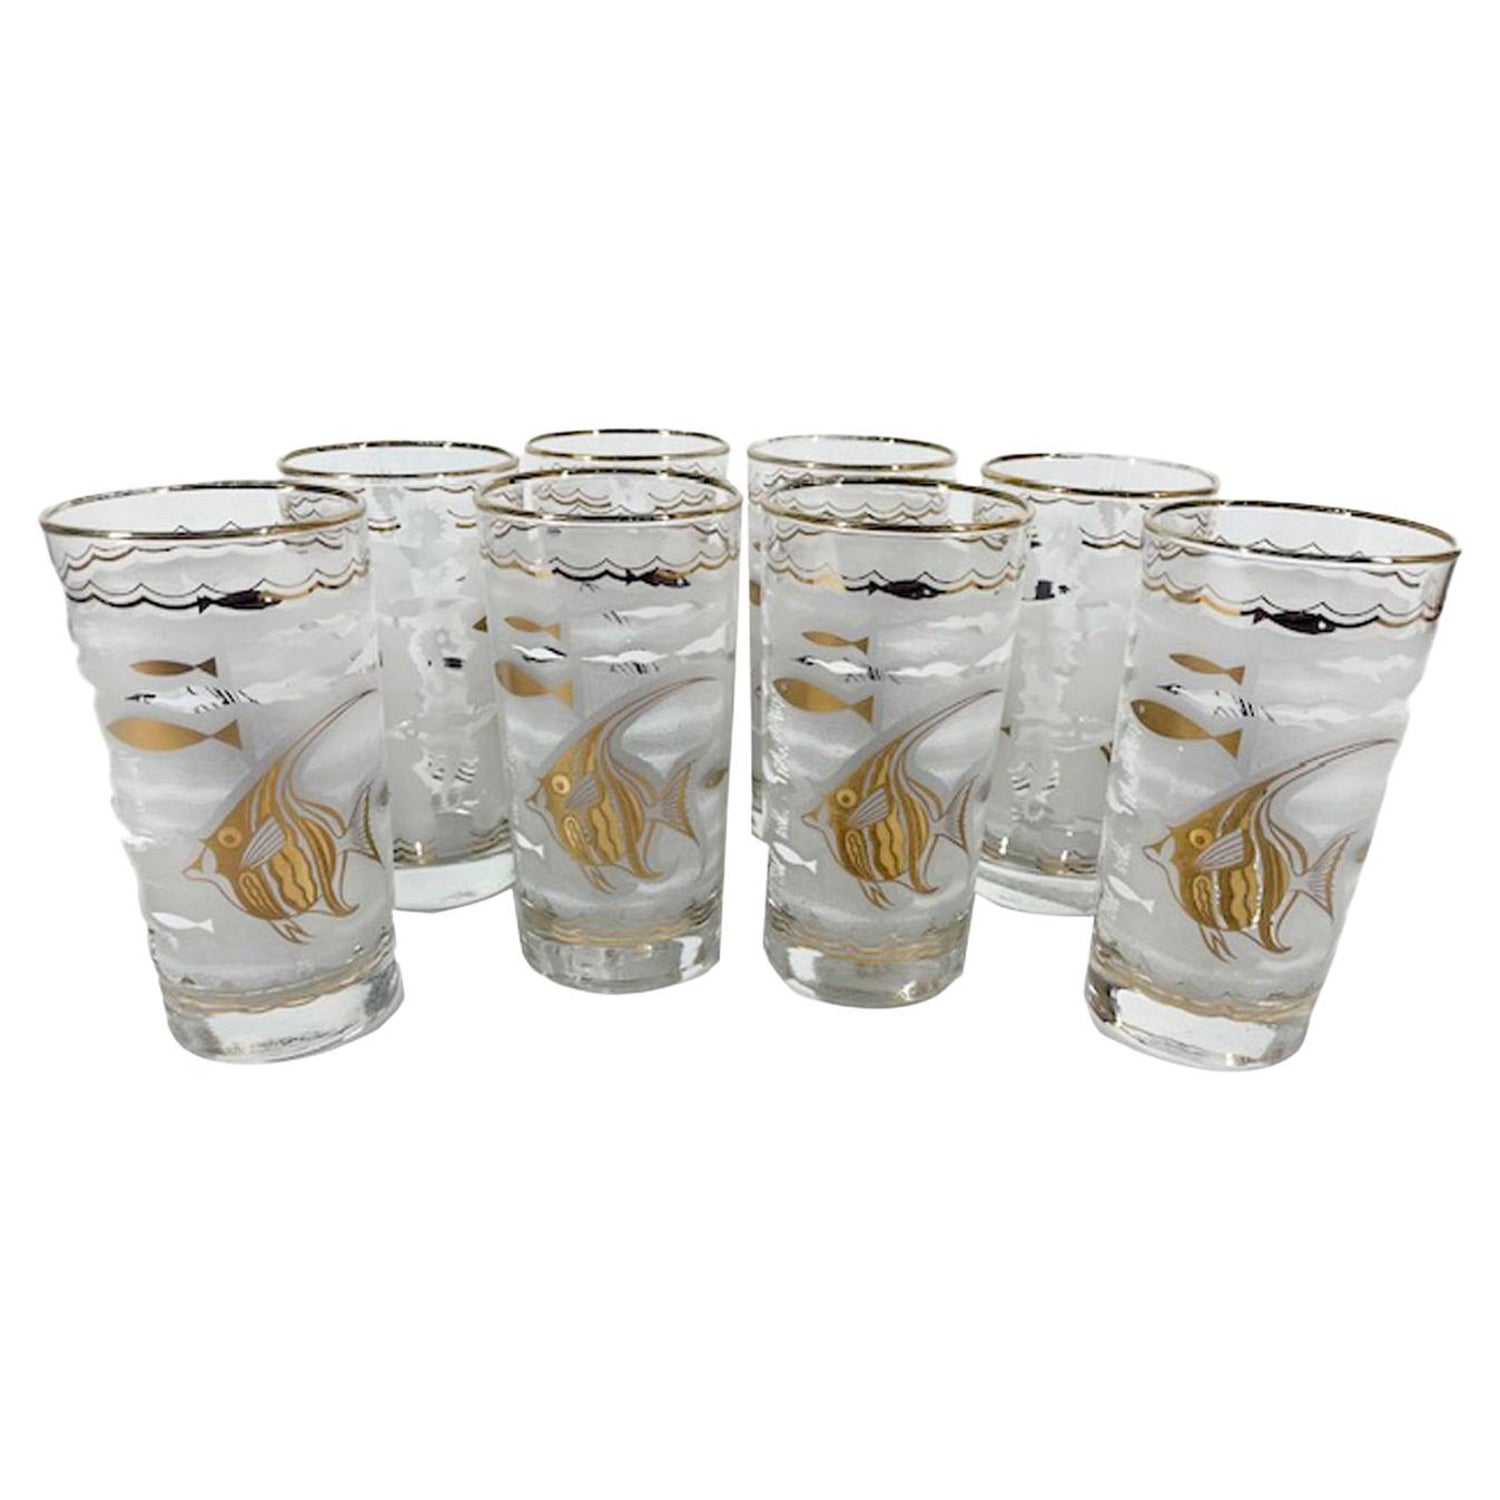 https://a.1stdibscdn.com/eight-libbey-highball-glasses-with-22k-gold-angel-fish-on-frosted-ground-for-sale/f_13752/f_268449421641829356053/f_26844942_1641829356422_bg_processed.jpg?width=1500